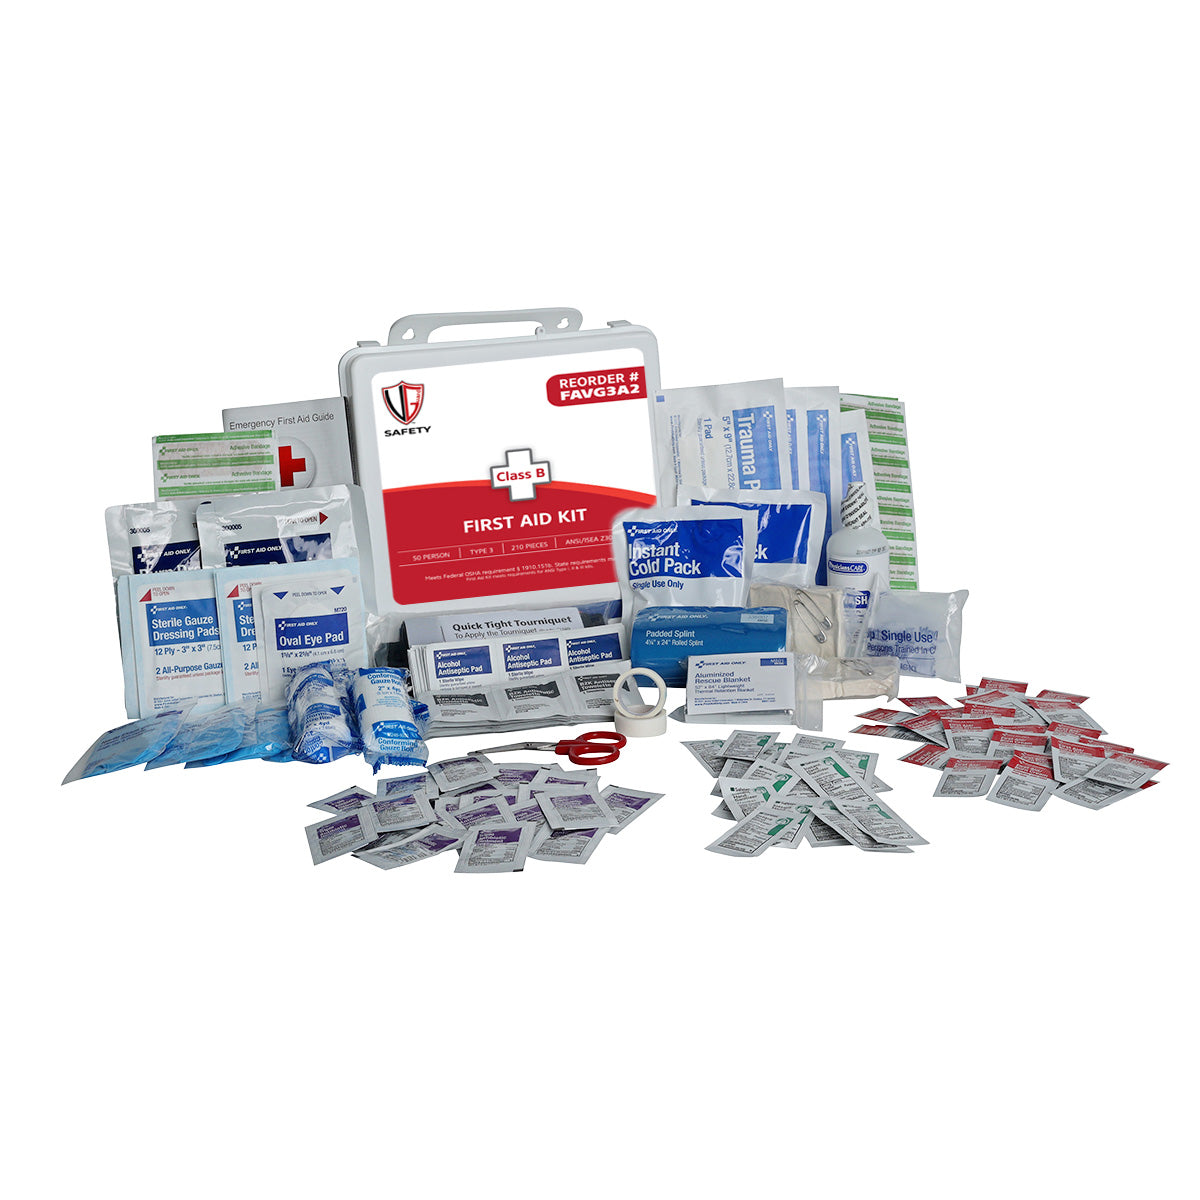 FAVG3A2 50 Person First Aid Kit